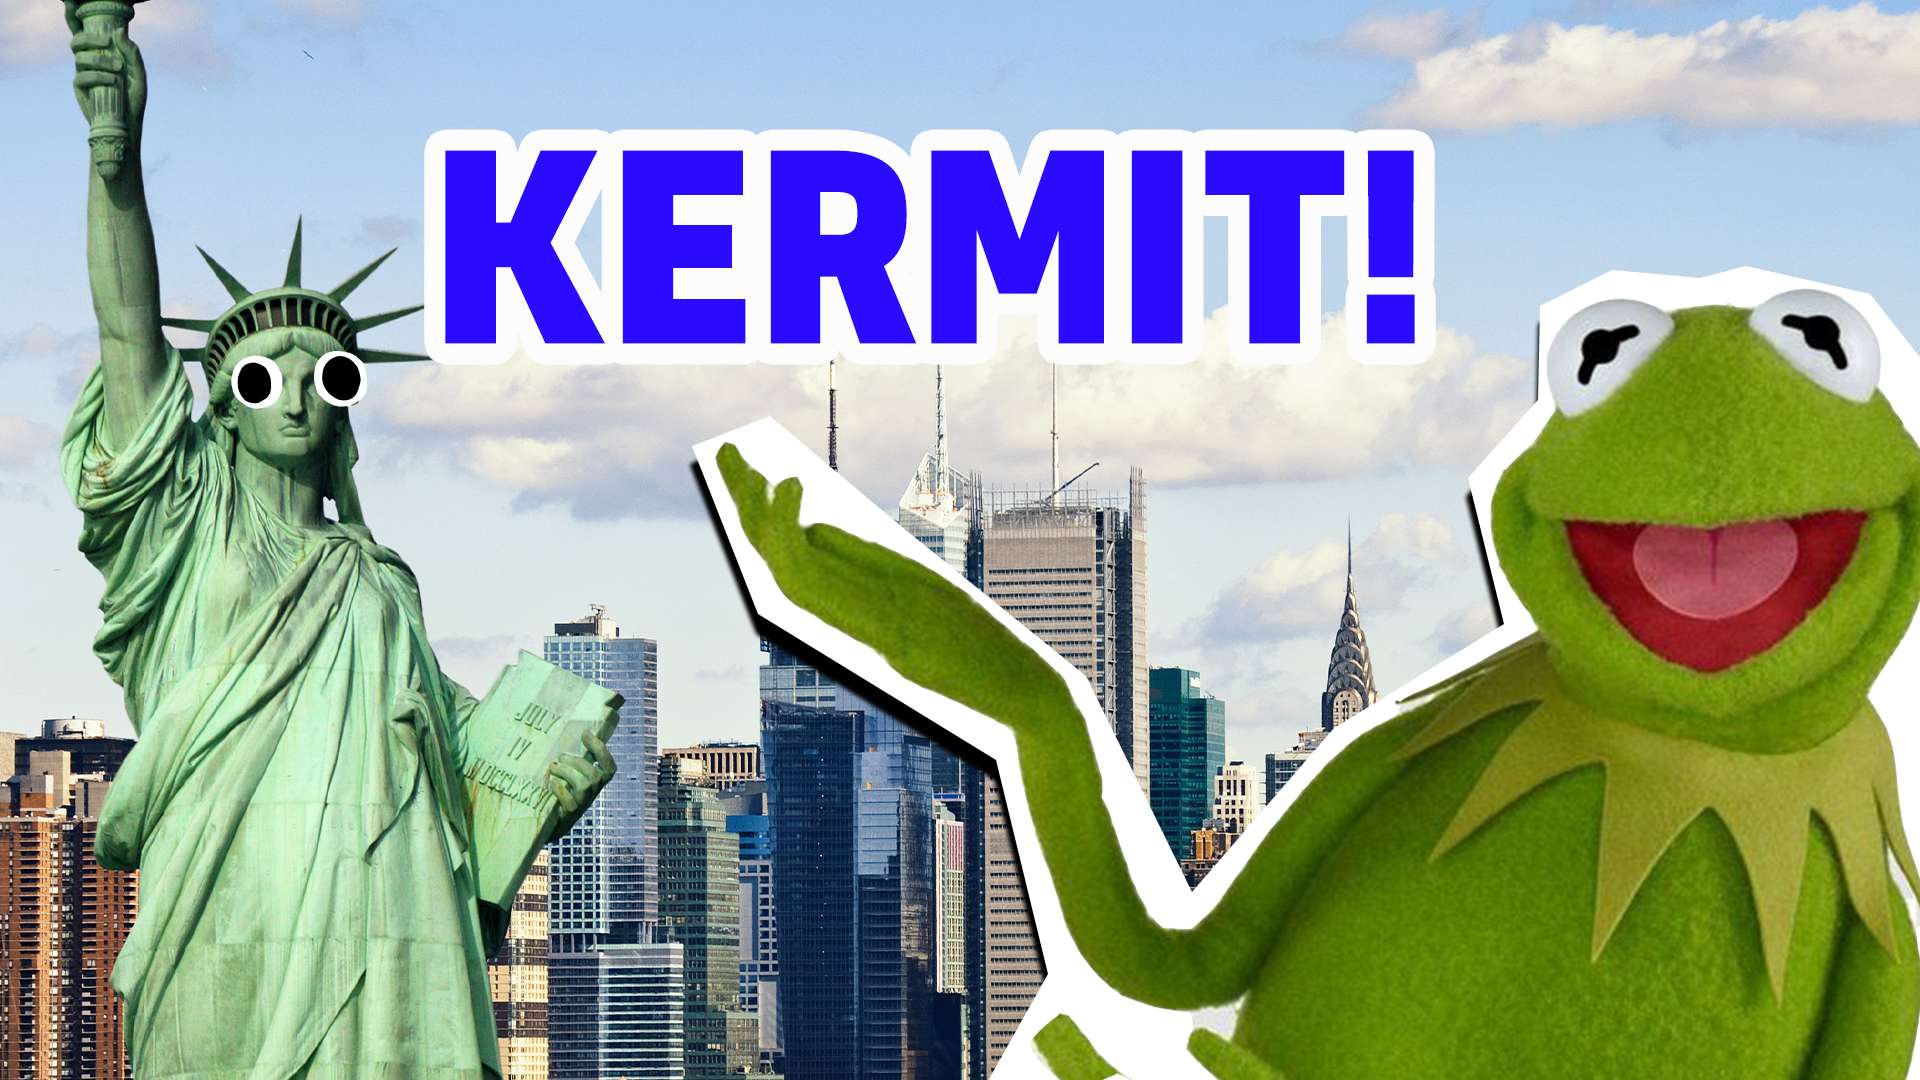 You're Kermit! You're optimistic, kind and you really really care about your friends! When life (or a taxi) runs you down, you don't let that stop you!